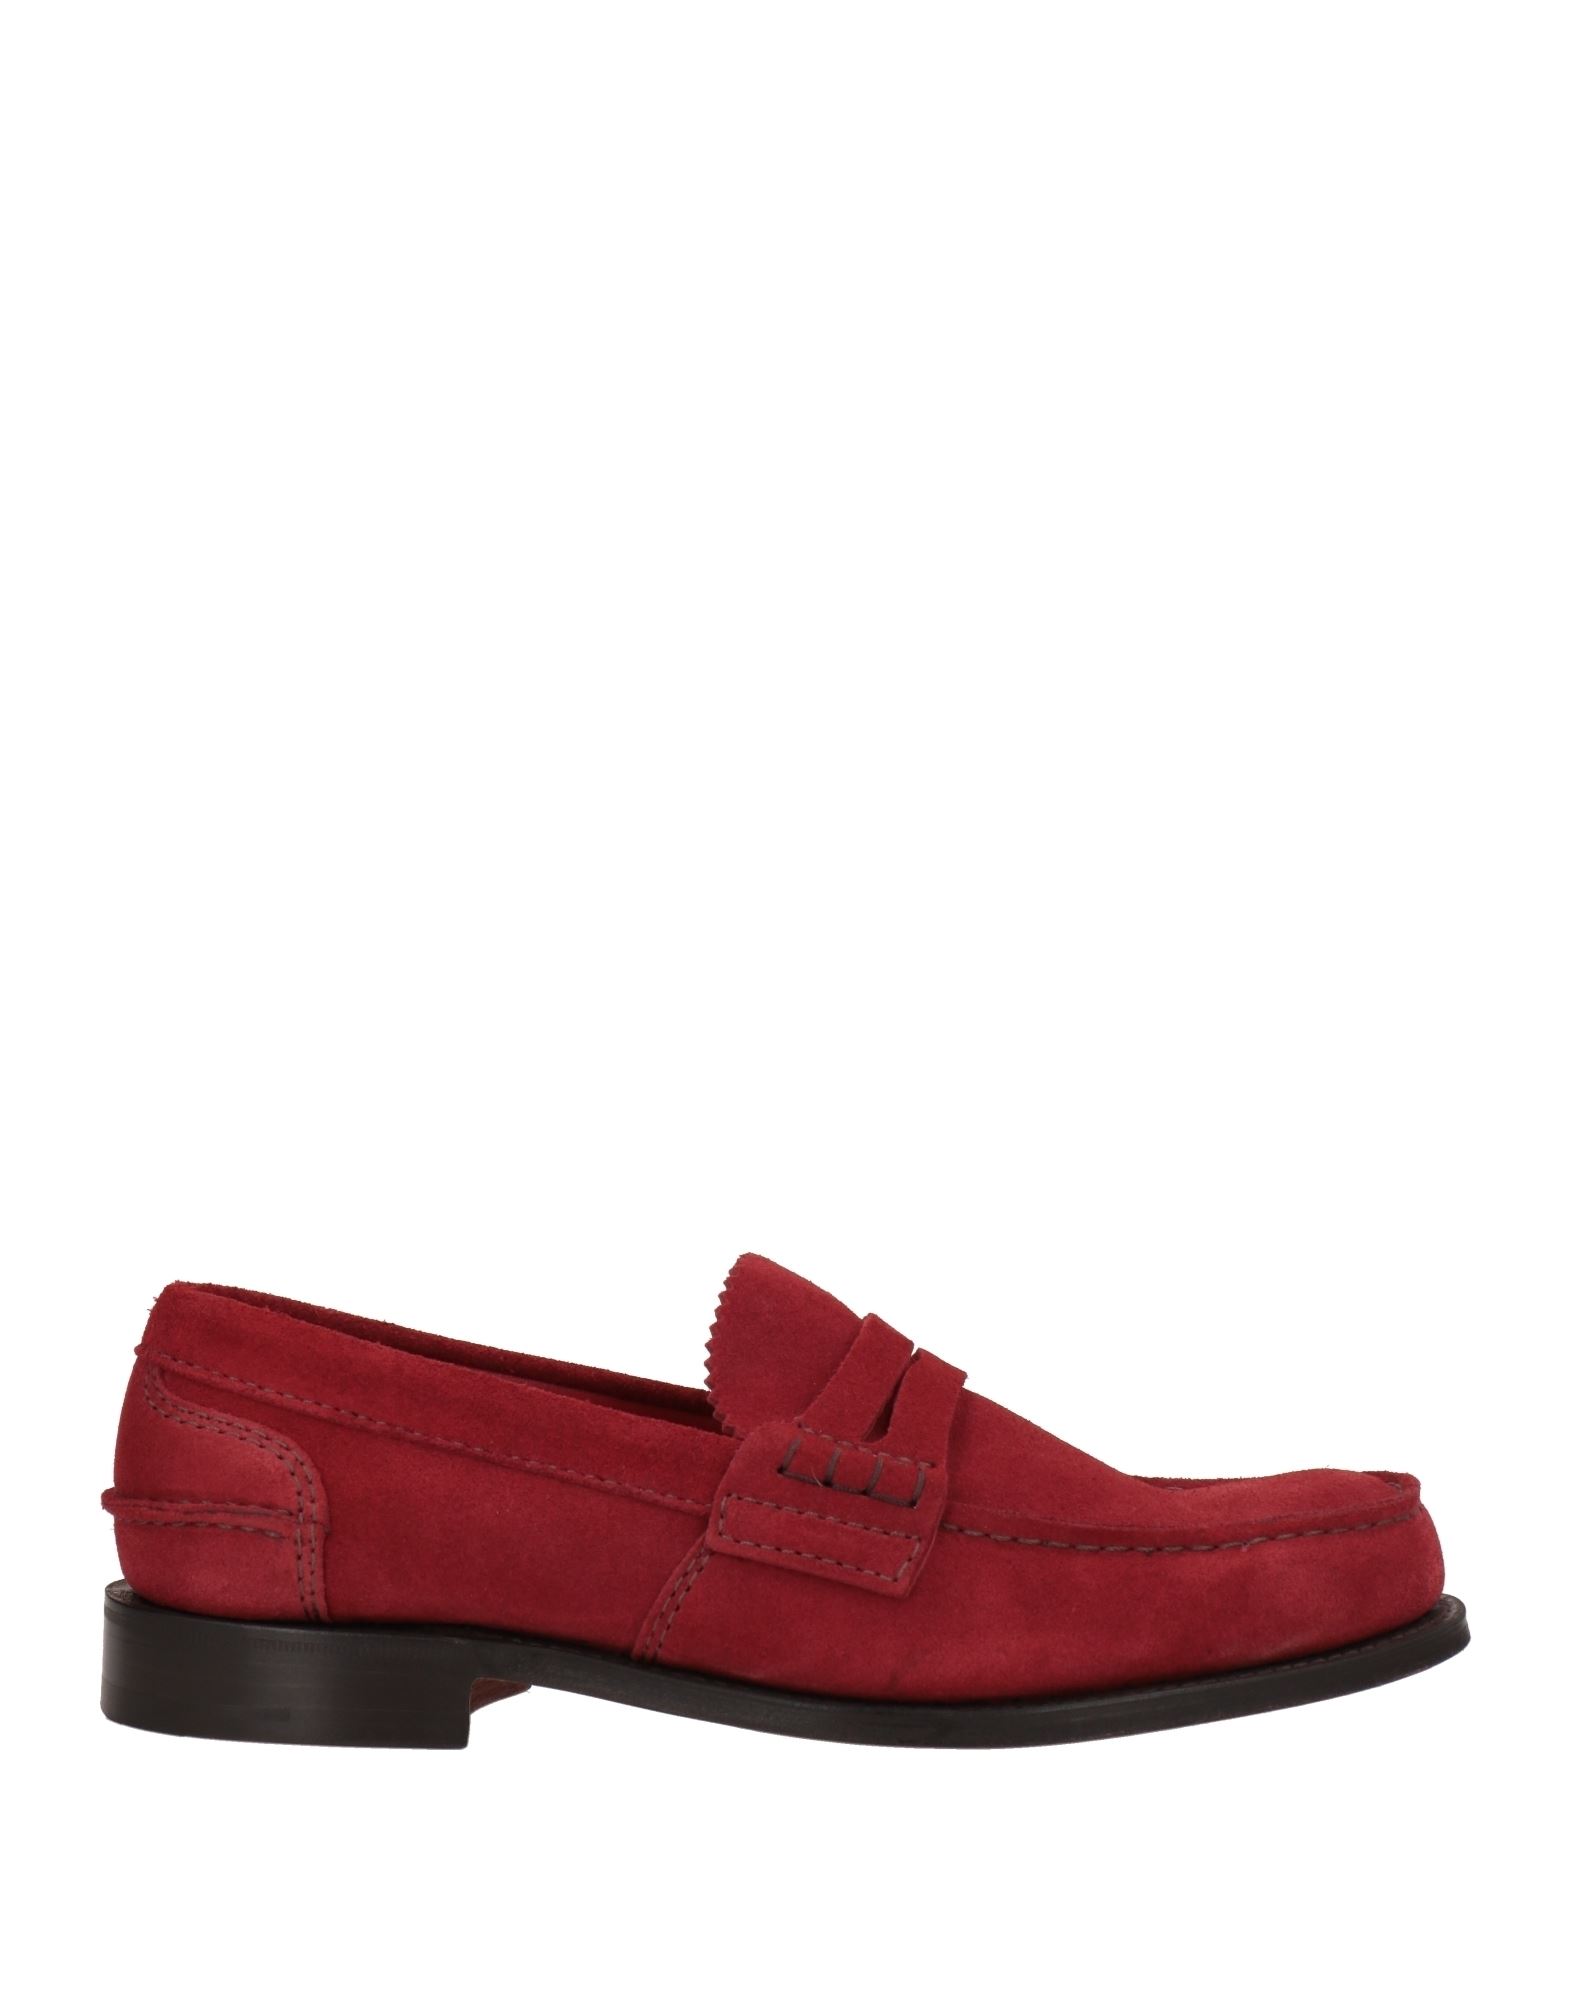 Church's Man Loafers Brick Red Size 7 Soft Leather